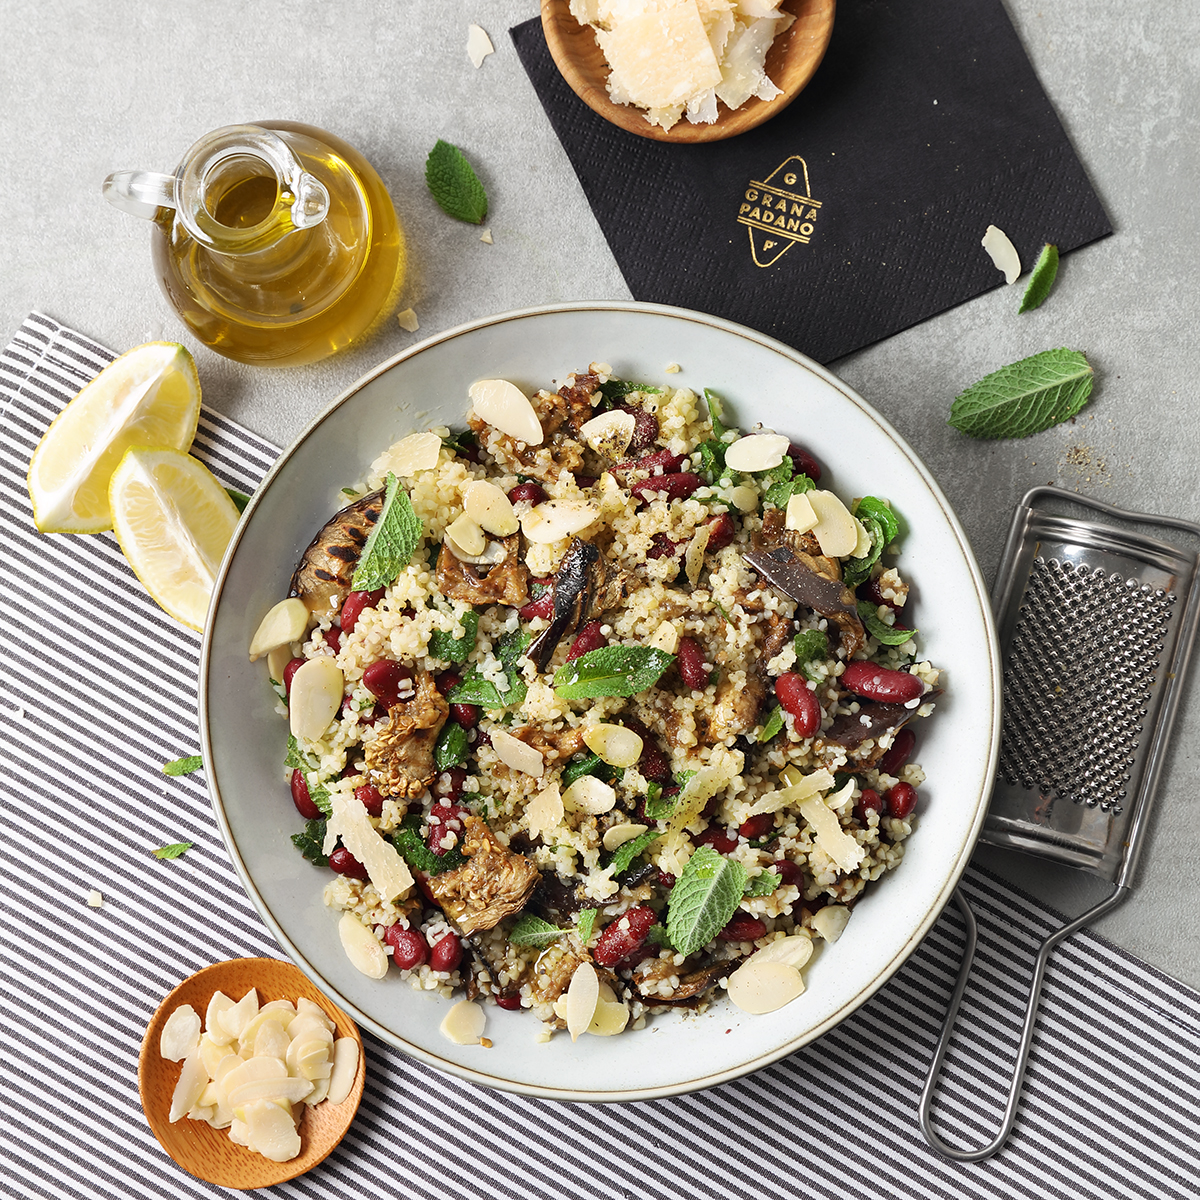 Tabbouleh with grilled aubergine, red kidney beans, mint, almonds, ginger and Grana Padano Riserva